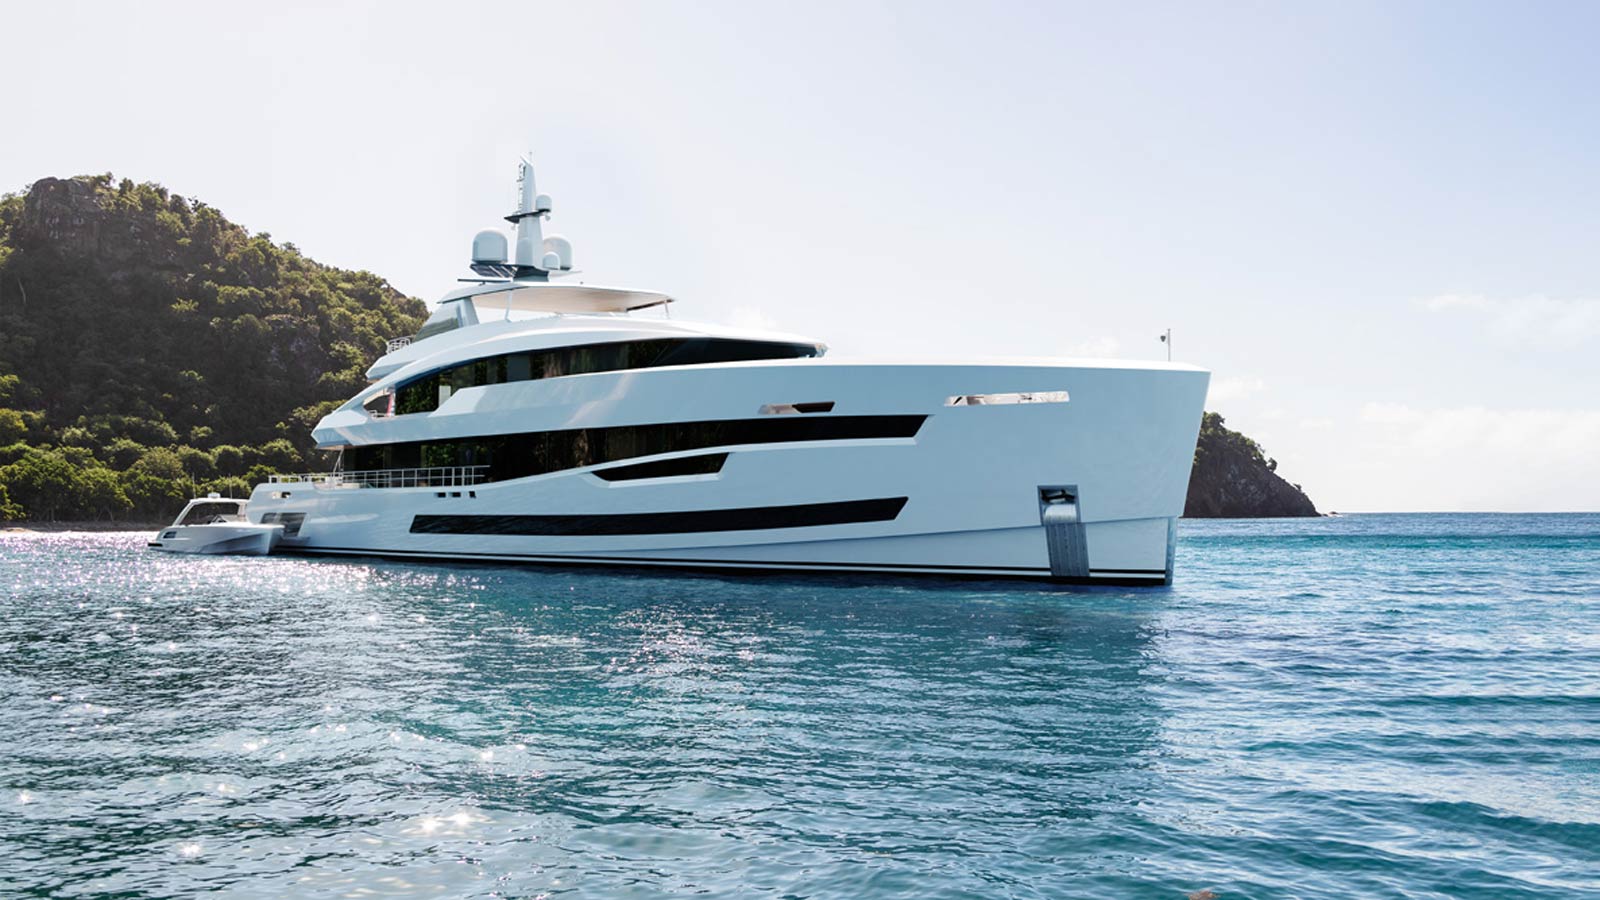 Sales success for Heesen: YN 20457 Project Akira has new owners!